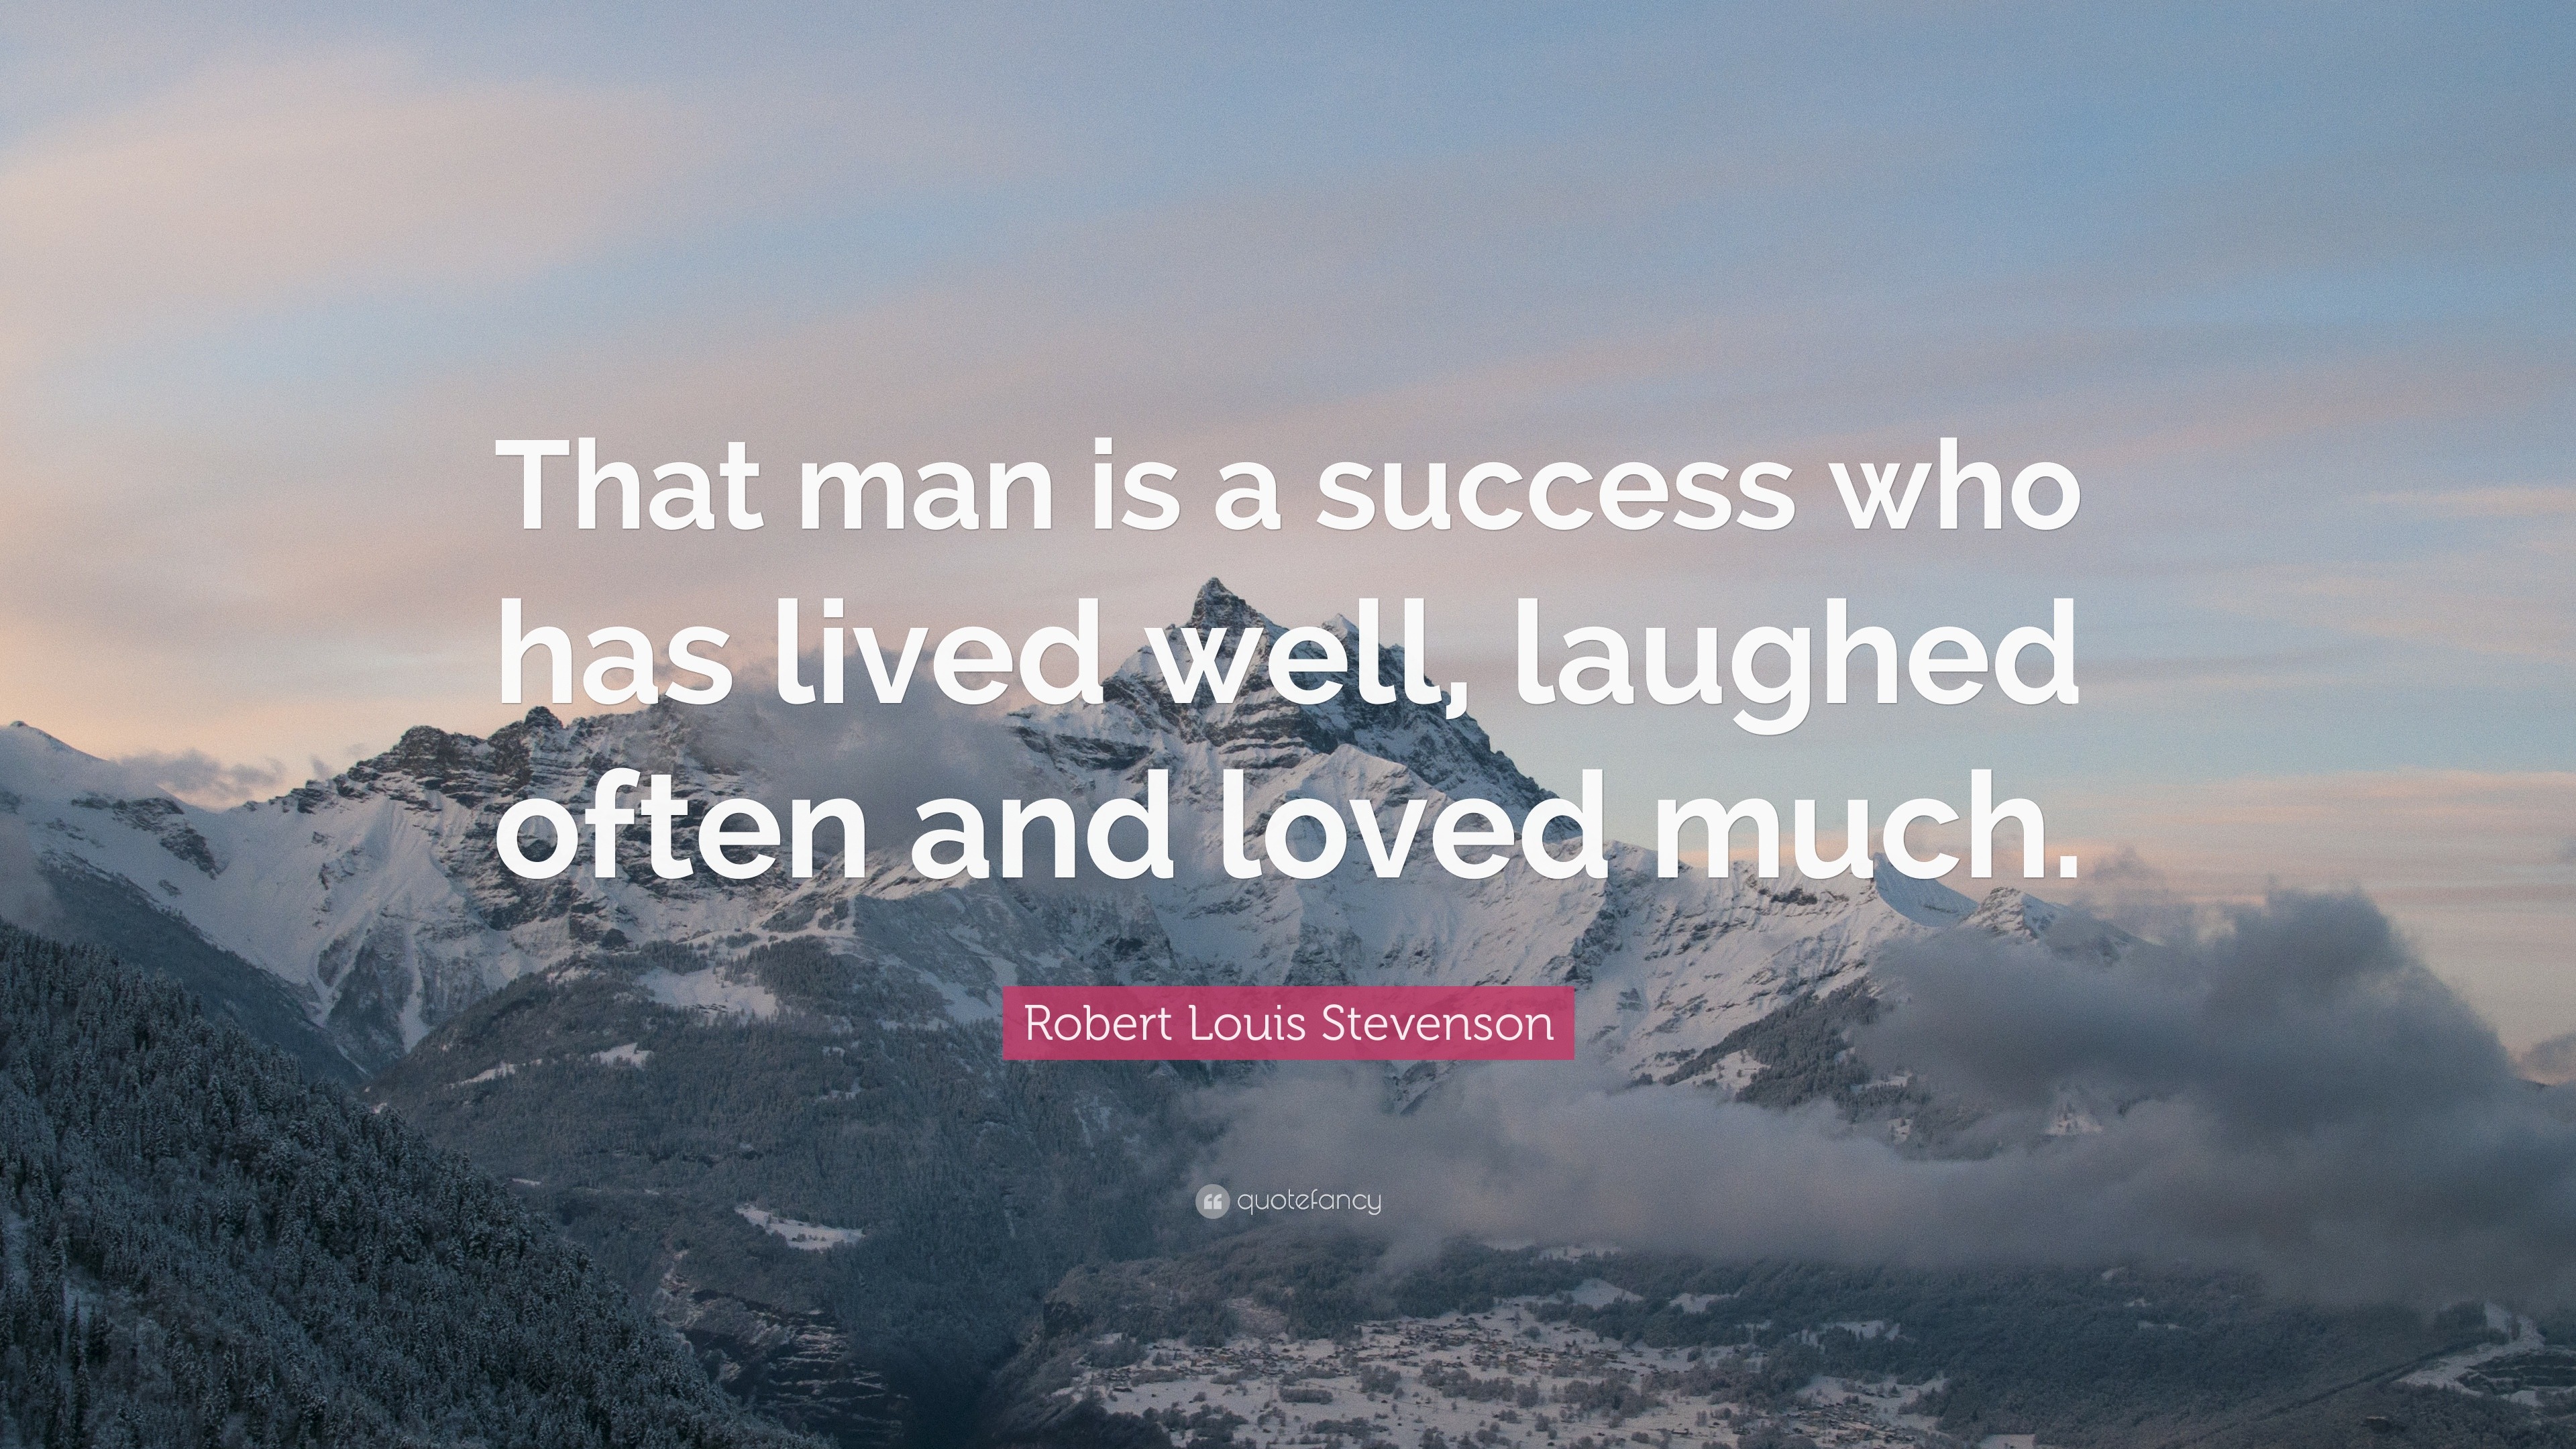 Robert Louis Stevenson Quote: “That man is a success who has lived well, laughed often and loved ...